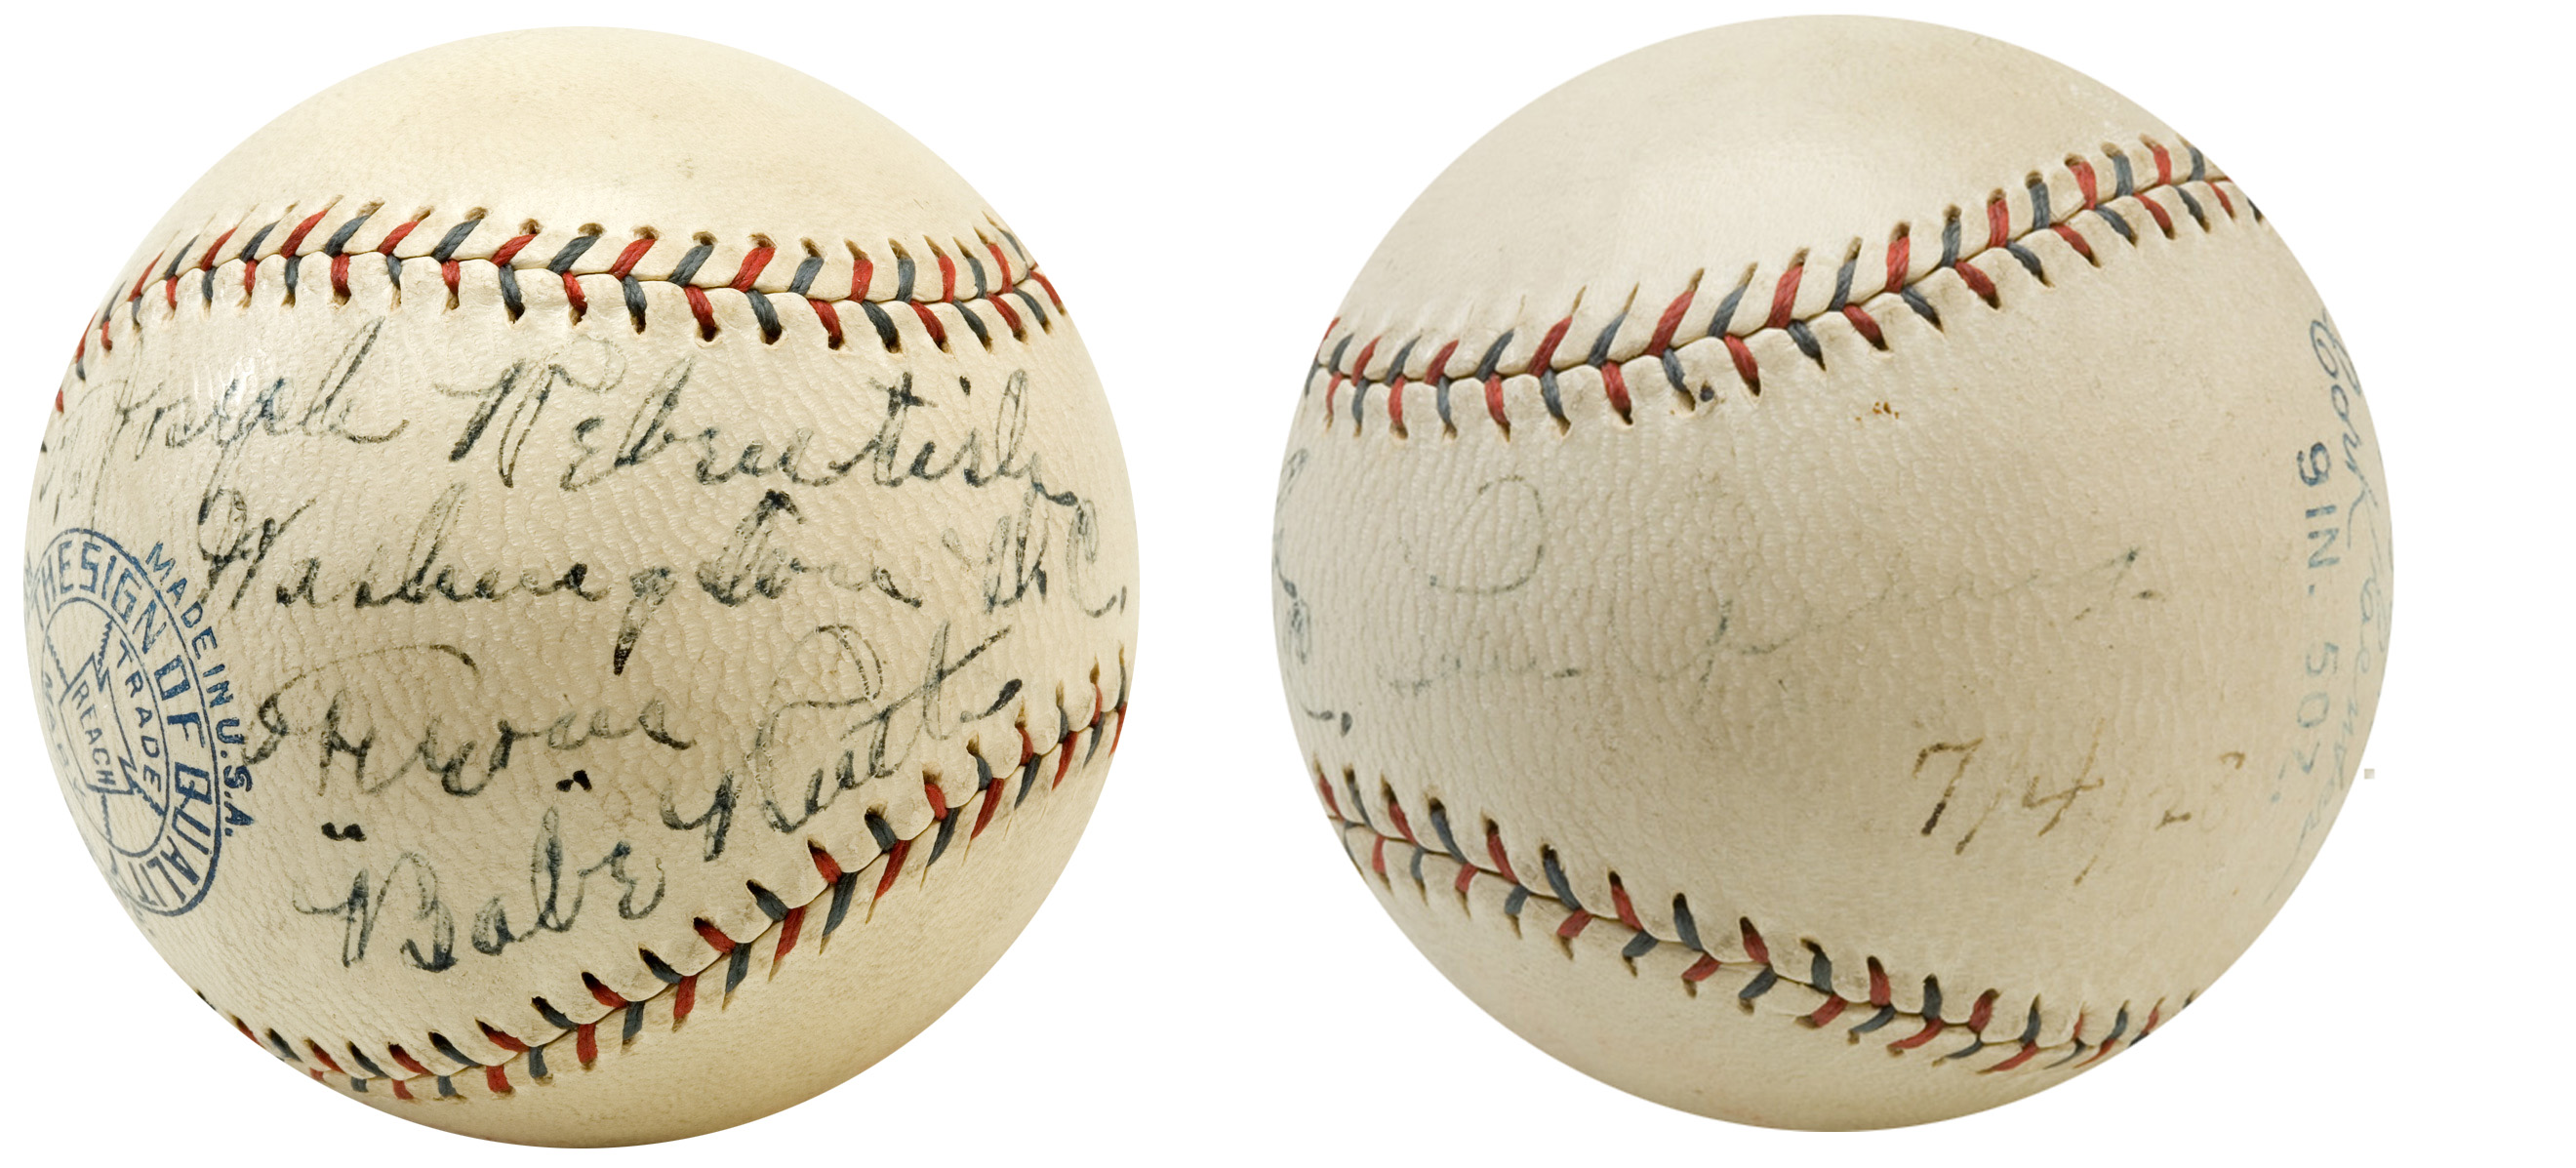 FREE APPRAISAL. Sell Your 1927 New York Yankees Signed Baseball.